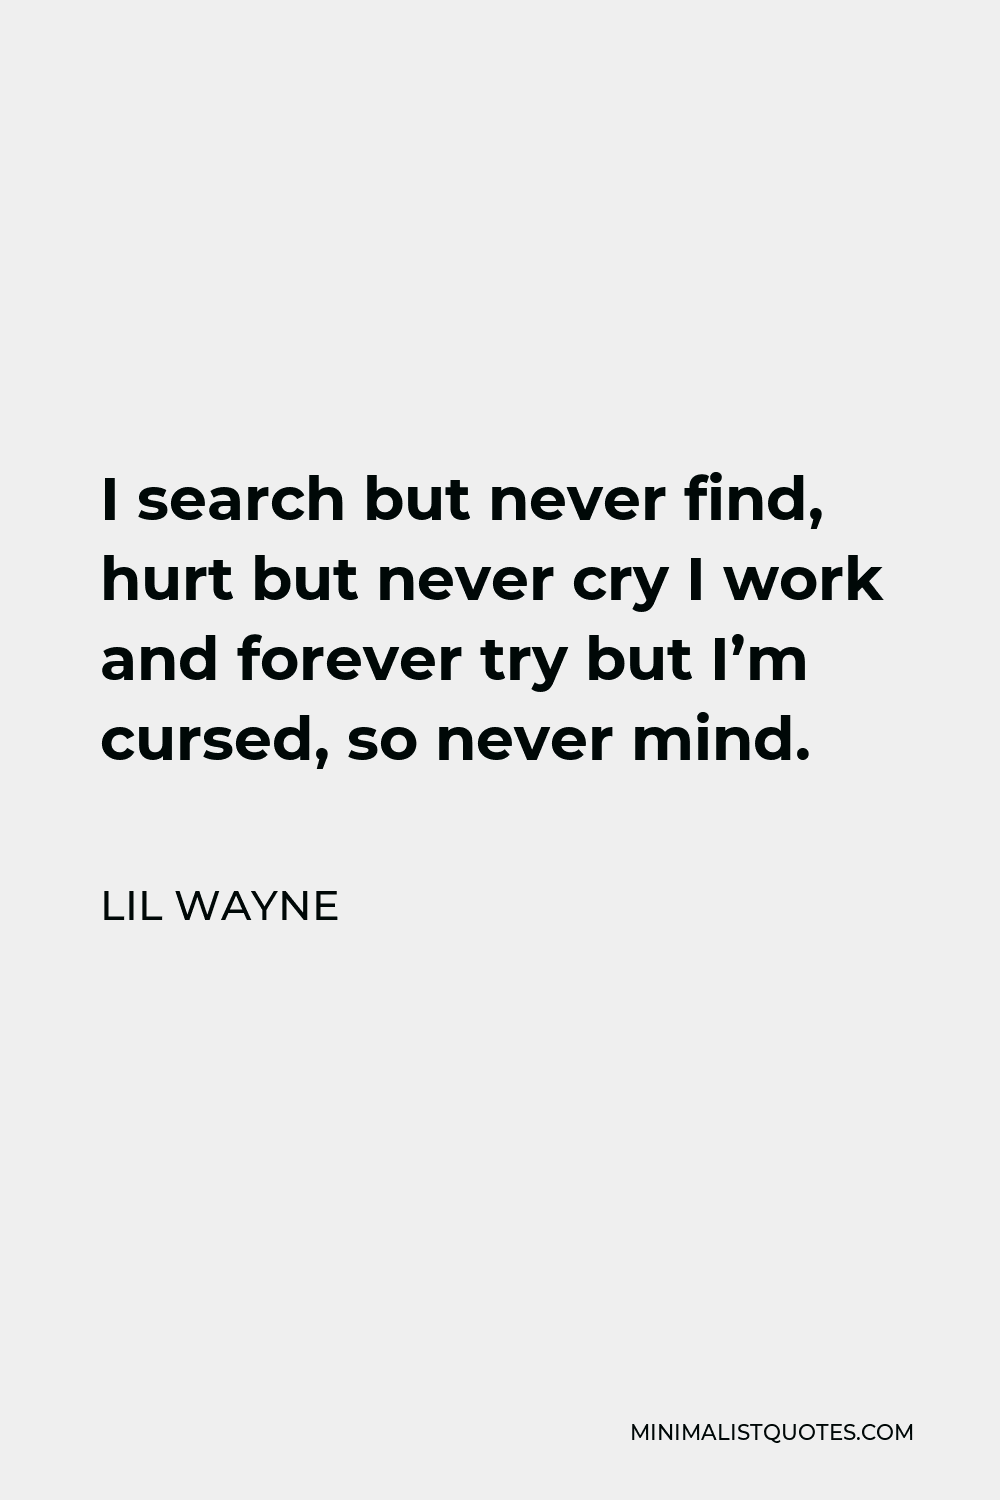 Lil Wayne Quote - I search but never find, hurt but never cry I work and forever try but I’m cursed, so never mind.